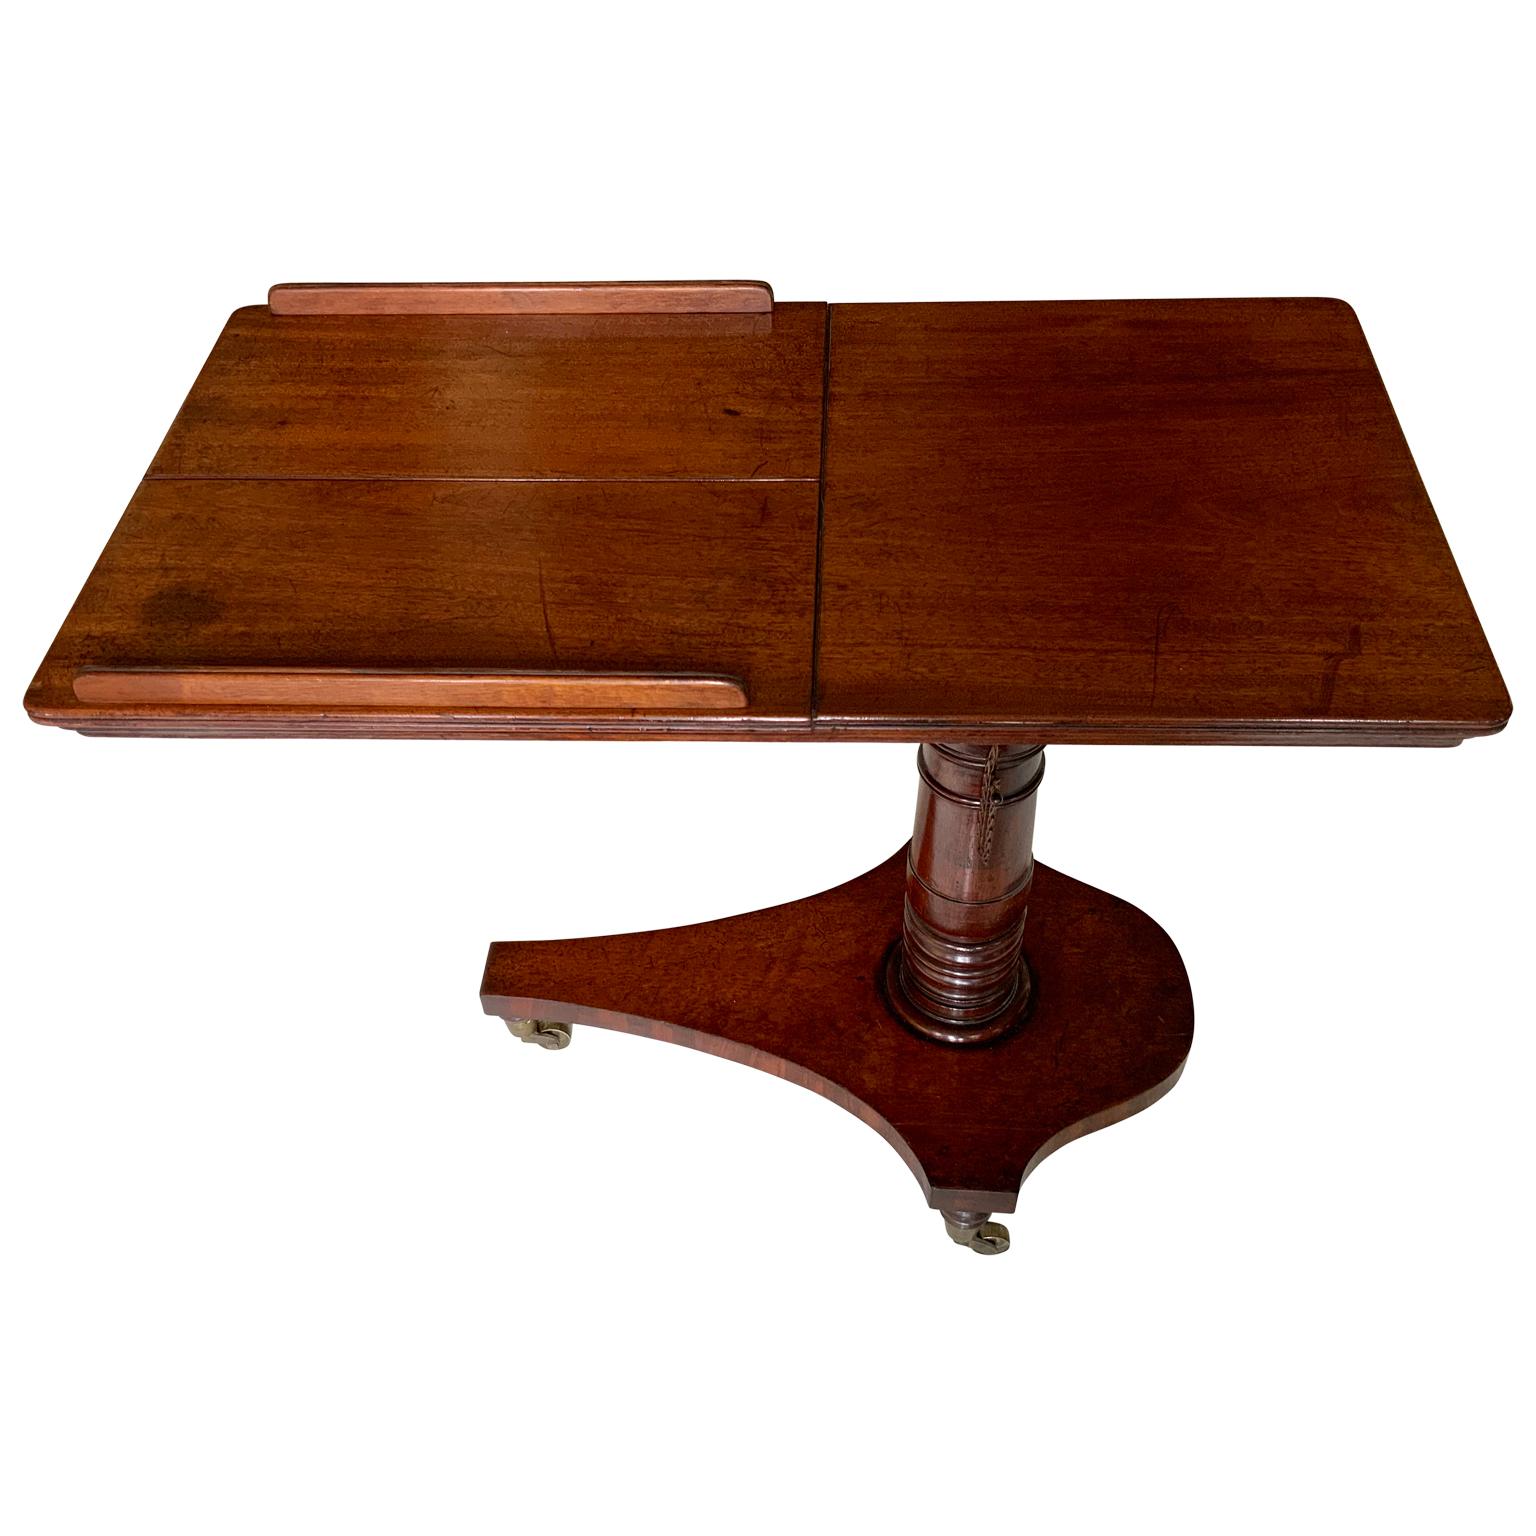 English Mahogany Adjustable Reading or Musical Table Stand 2